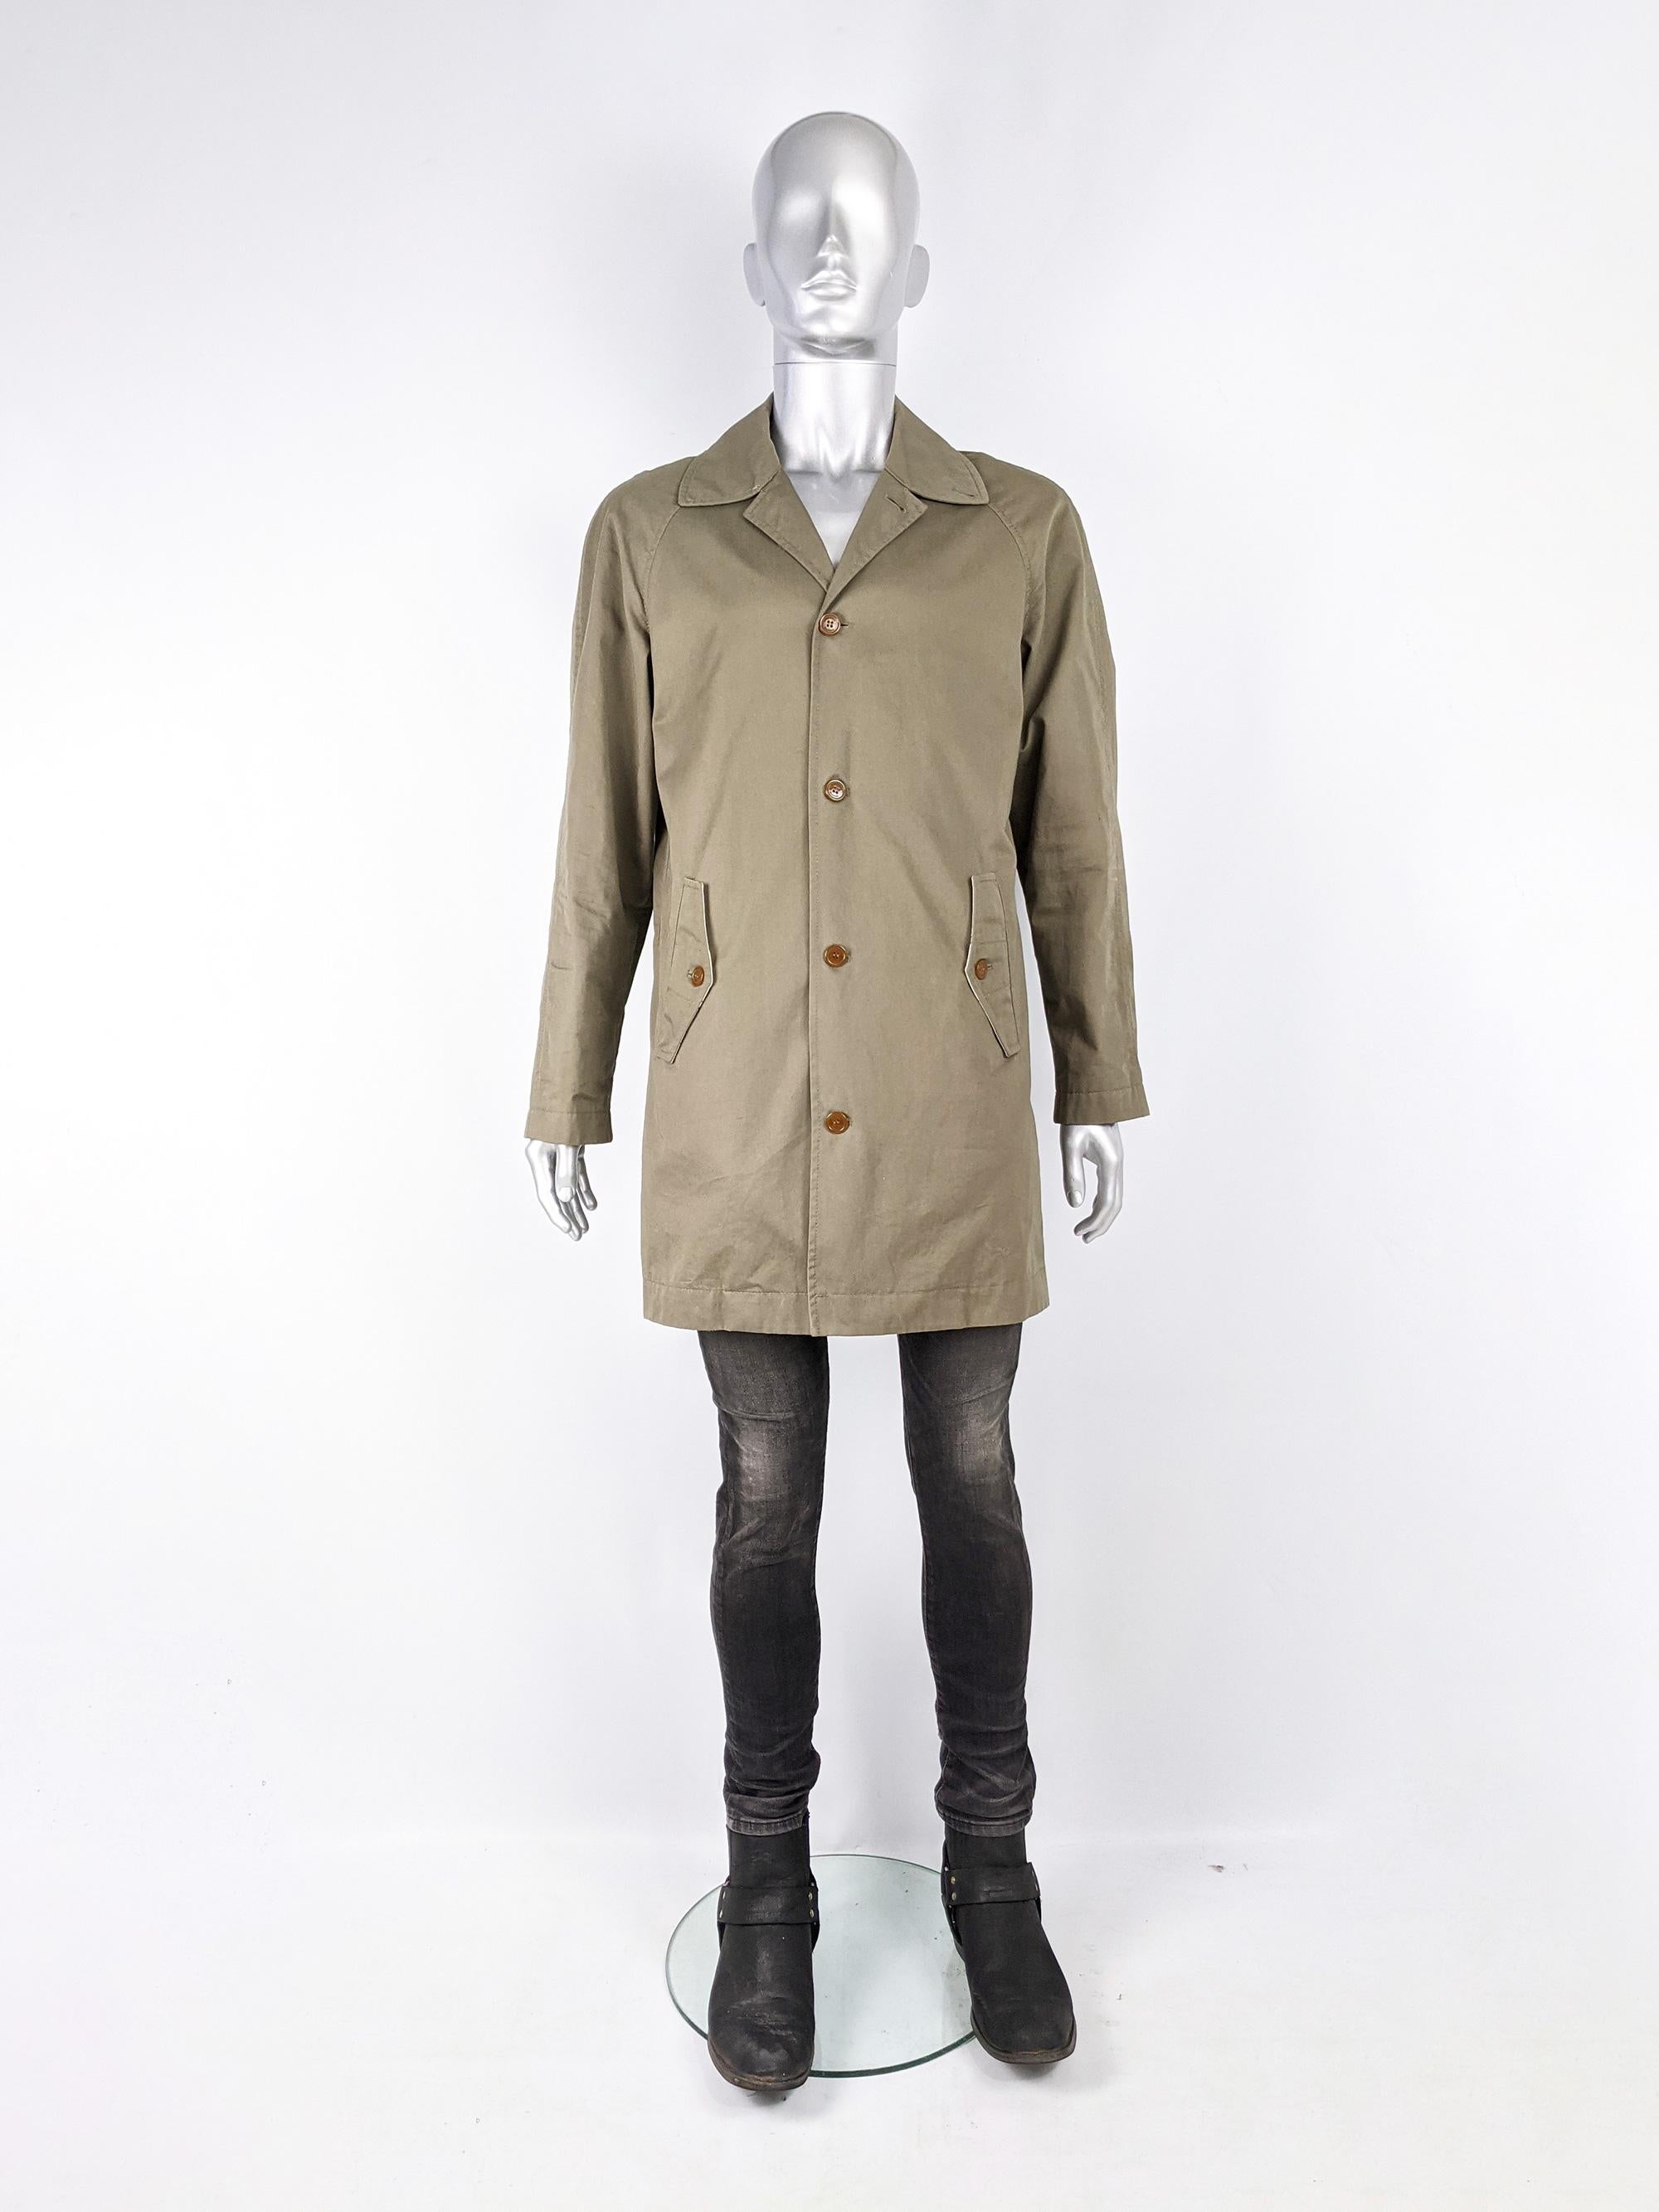 A stylish and rare mens Vivienne Westwood Man coat in a khaki cotton gabardine with a wide spread collar, Westwood's signature amber coloured buttons and a luxurious touch with the polka dot and logo patterned cotton facing on the fabric and on the